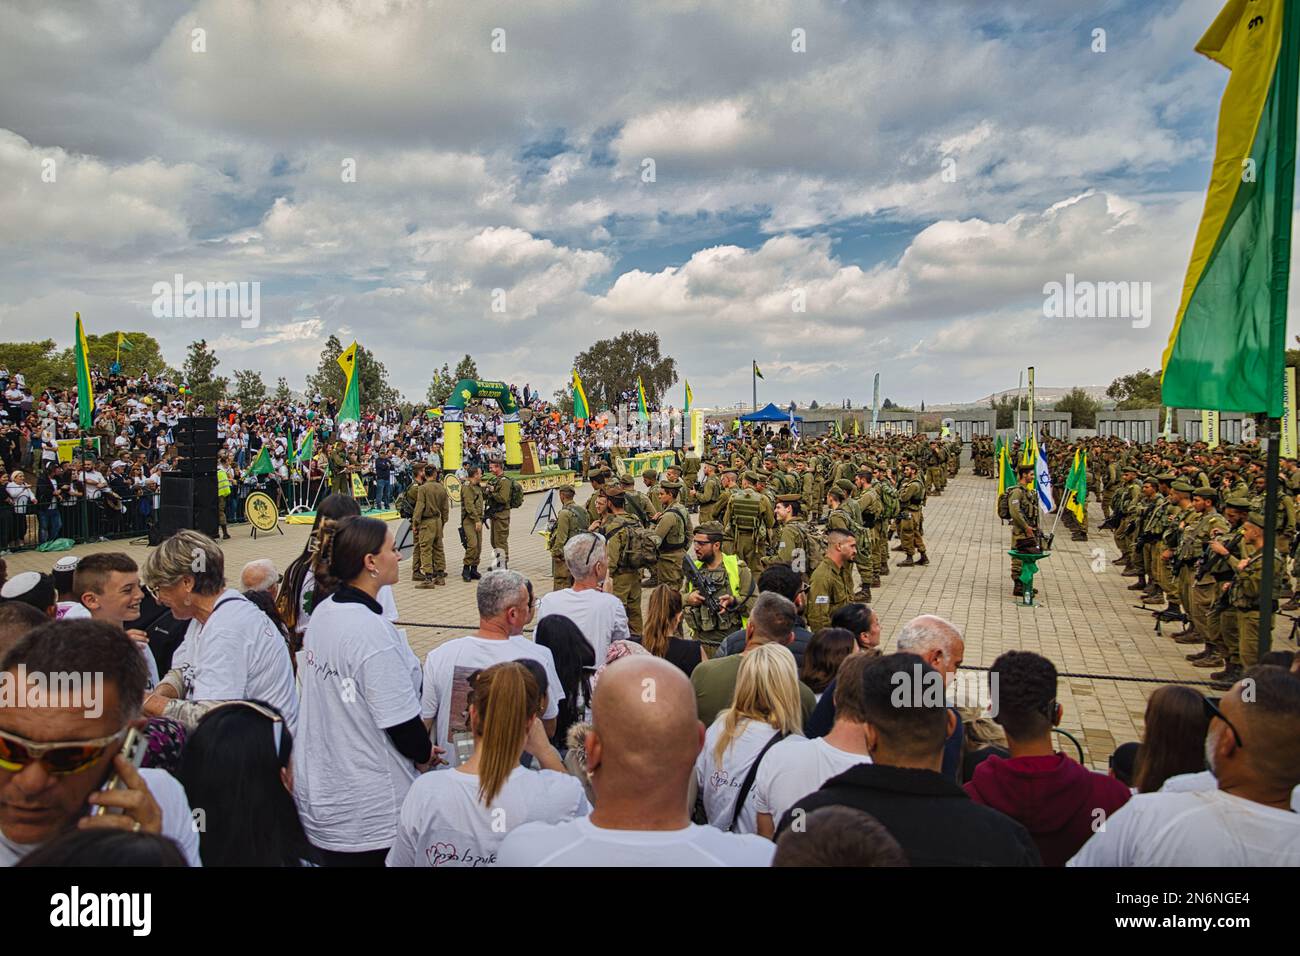 The Golani soldiers in uniform during an army ceremony in Israel Stock Photo